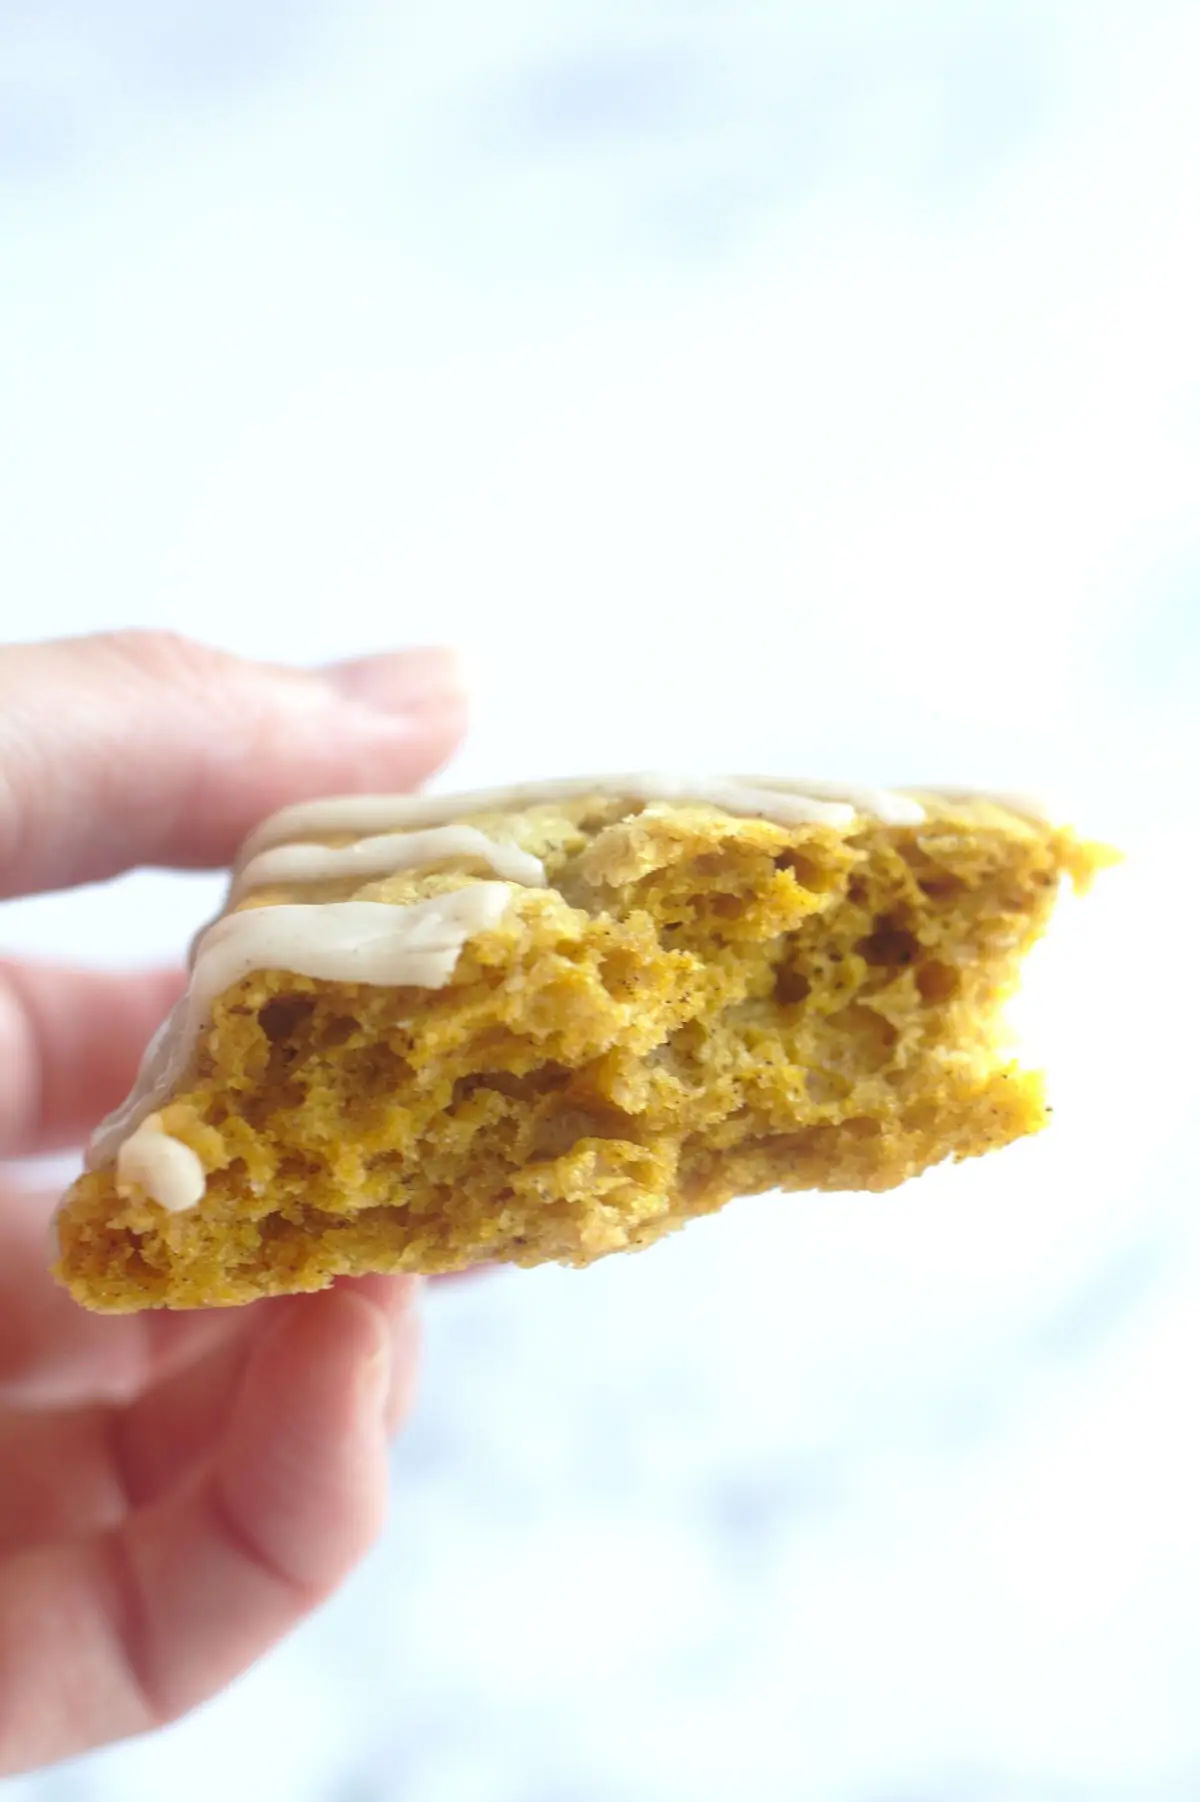 A piece of scone with a bite out of it, being held in someone's hand.